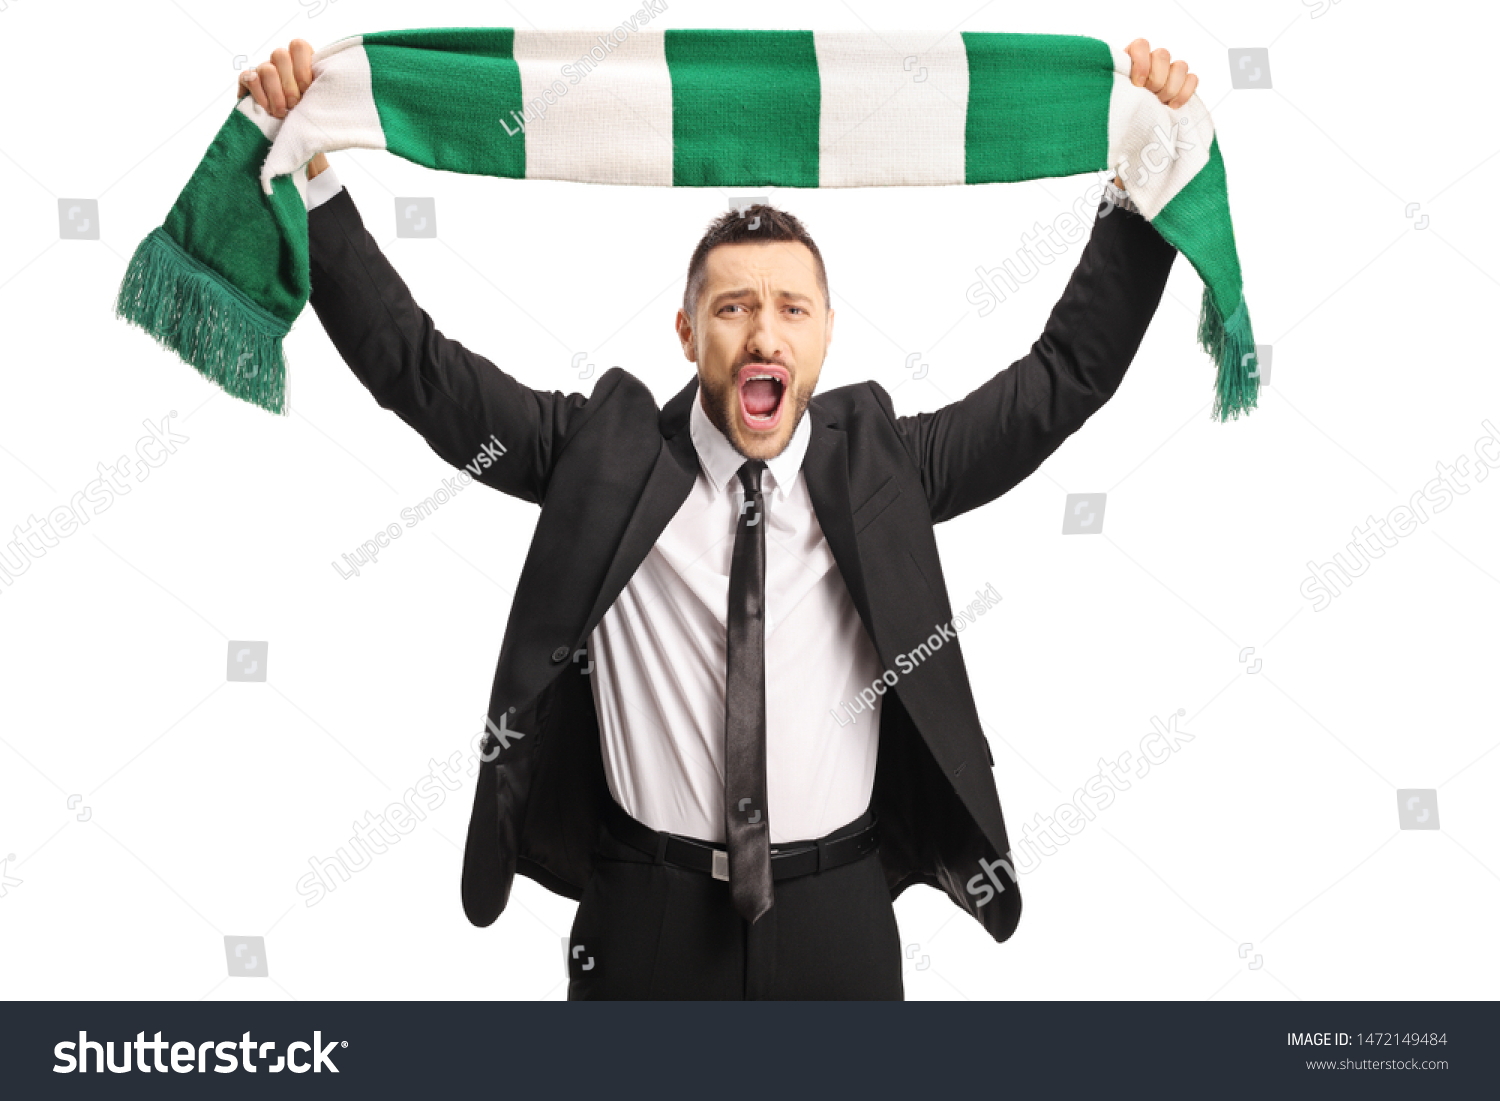 Cheerful young man in a suit cheering with a scarf isolated on white background #1472149484